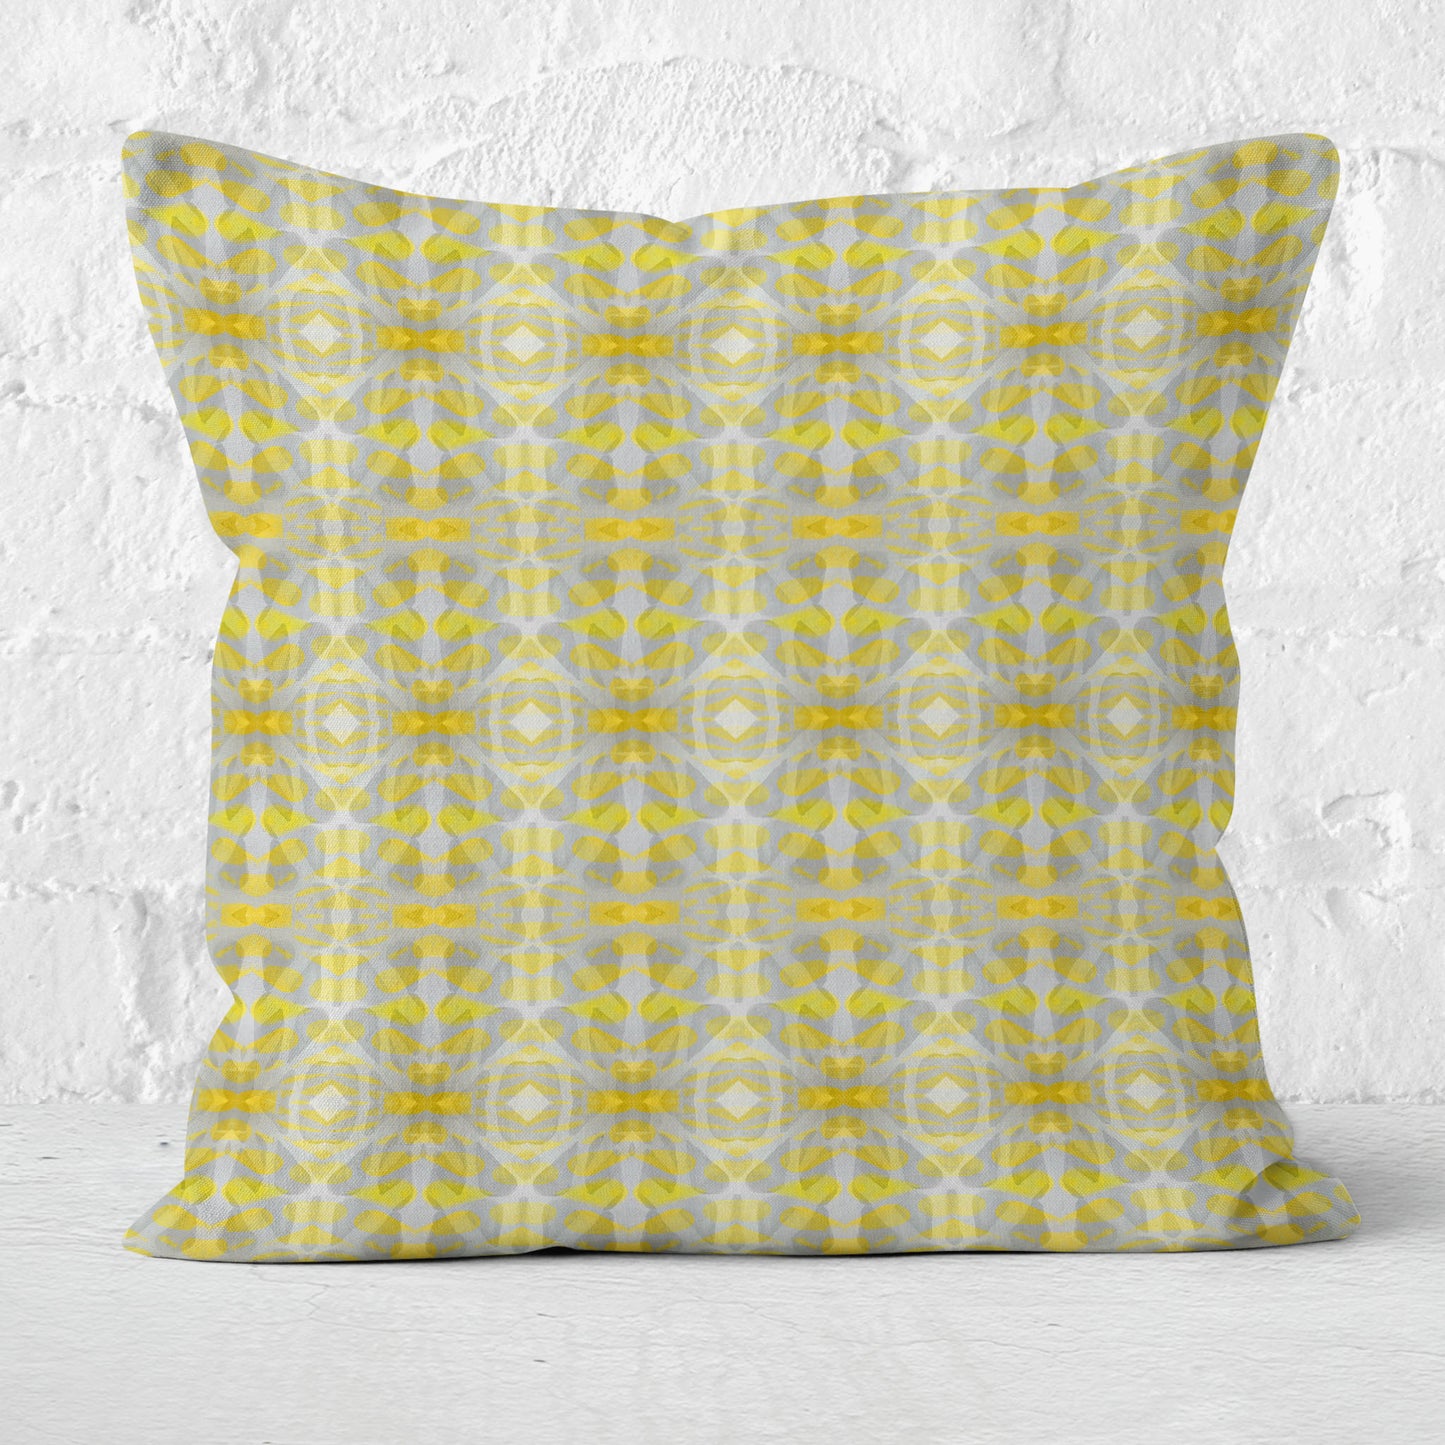 Square throw pillow featuring a yellow and gray abstract pattern leaning against a white brick wall